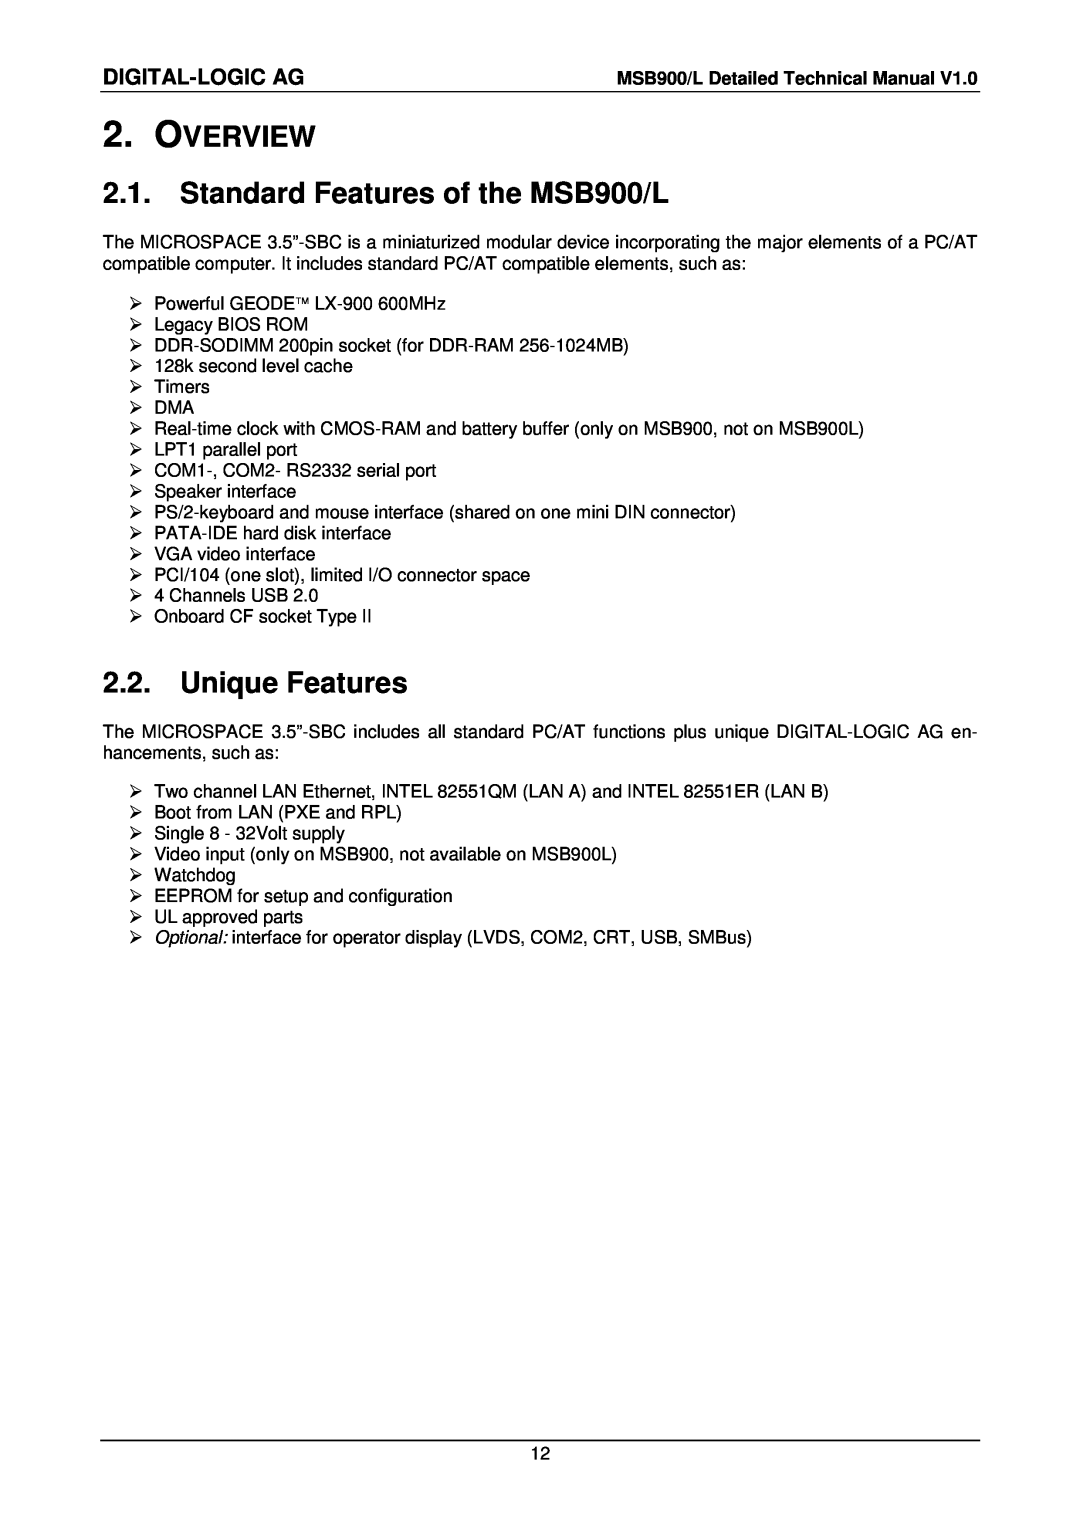 Compaq MSB900L user manual OVERVIEW 2.1. Standard Features of the MSB900/L, Unique Features, Digital-Logic Ag 